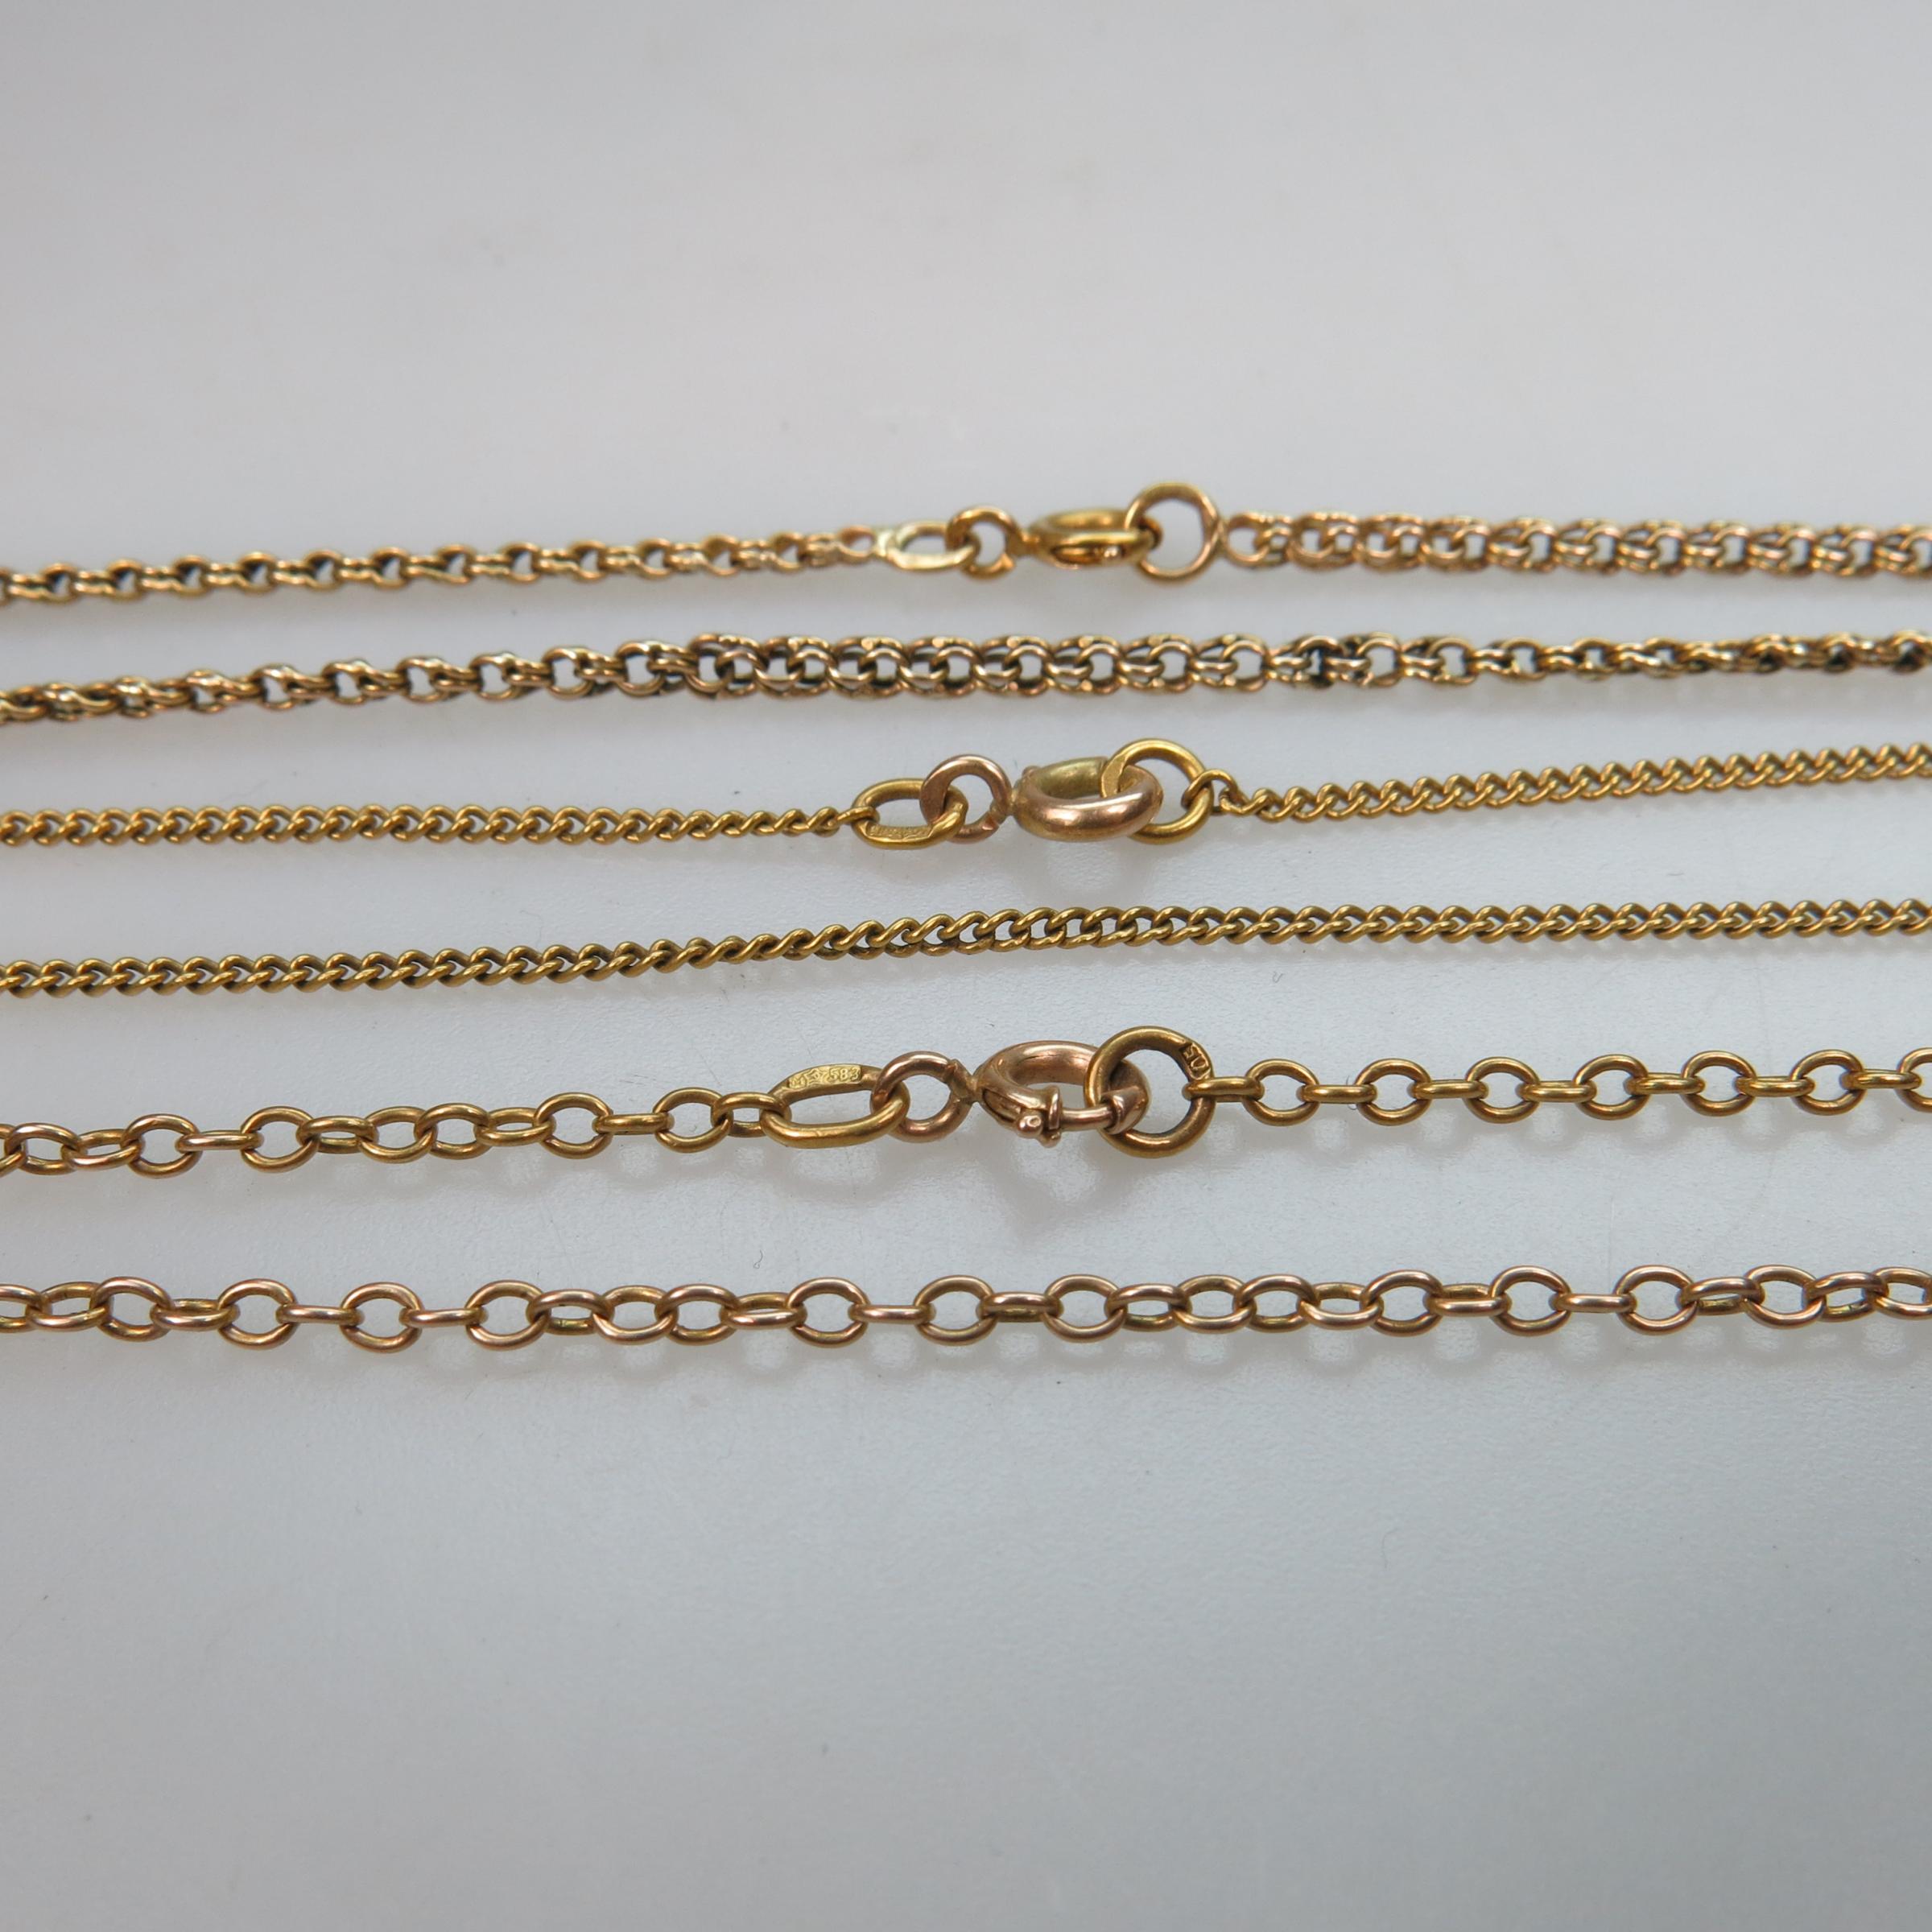 3 Russian 14k Yellow Gold Chains